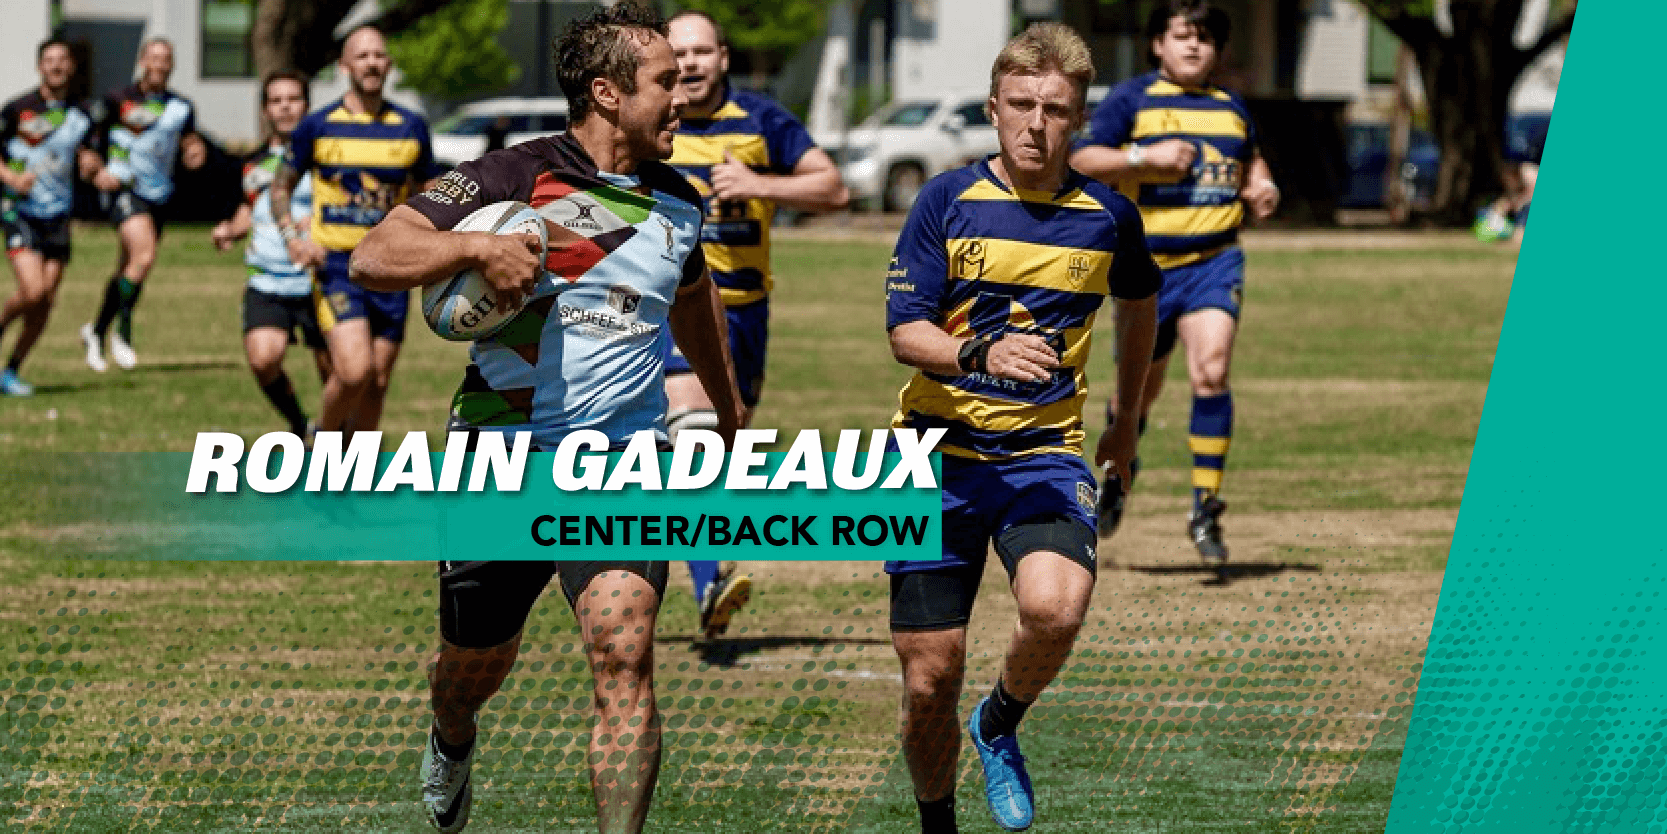 Local Dallas Harlequins Player Romain “Frenchie” Gadeaux Joins as Development Player